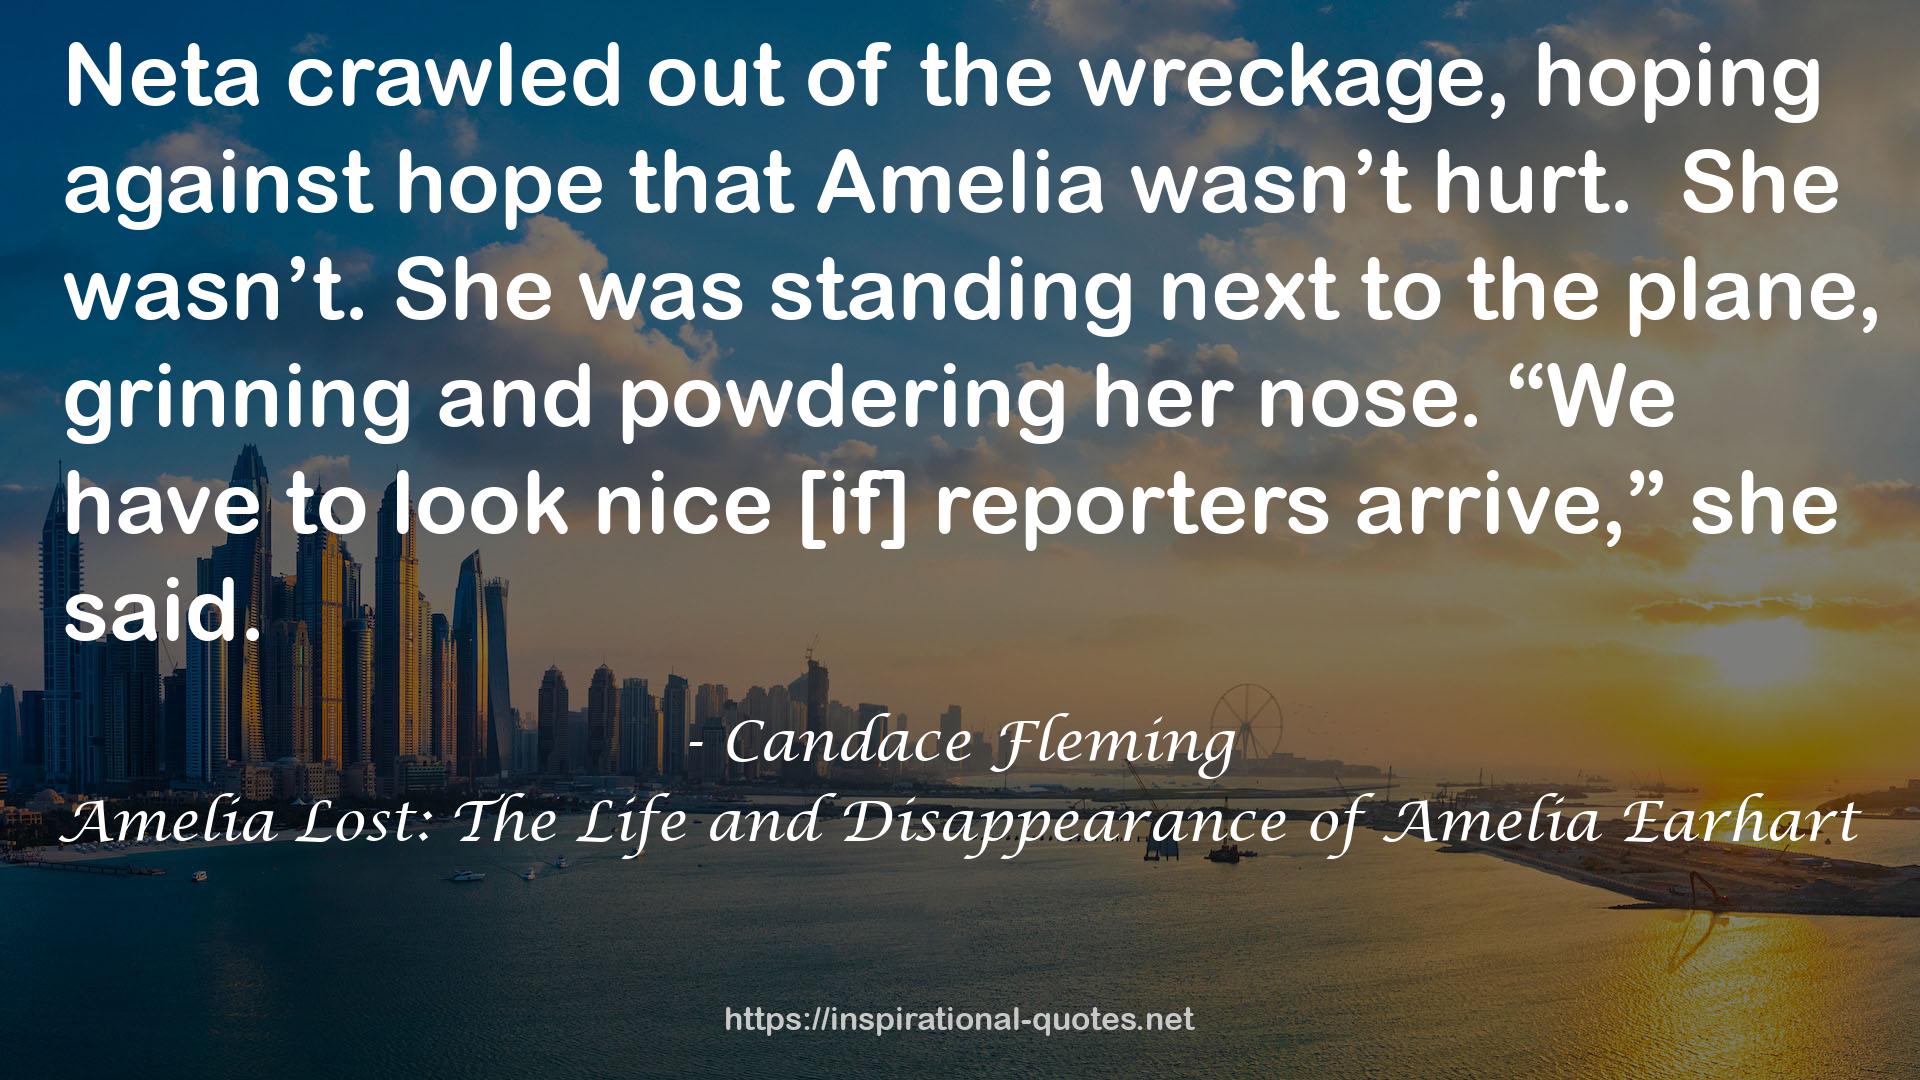 Amelia Lost: The Life and Disappearance of Amelia Earhart QUOTES